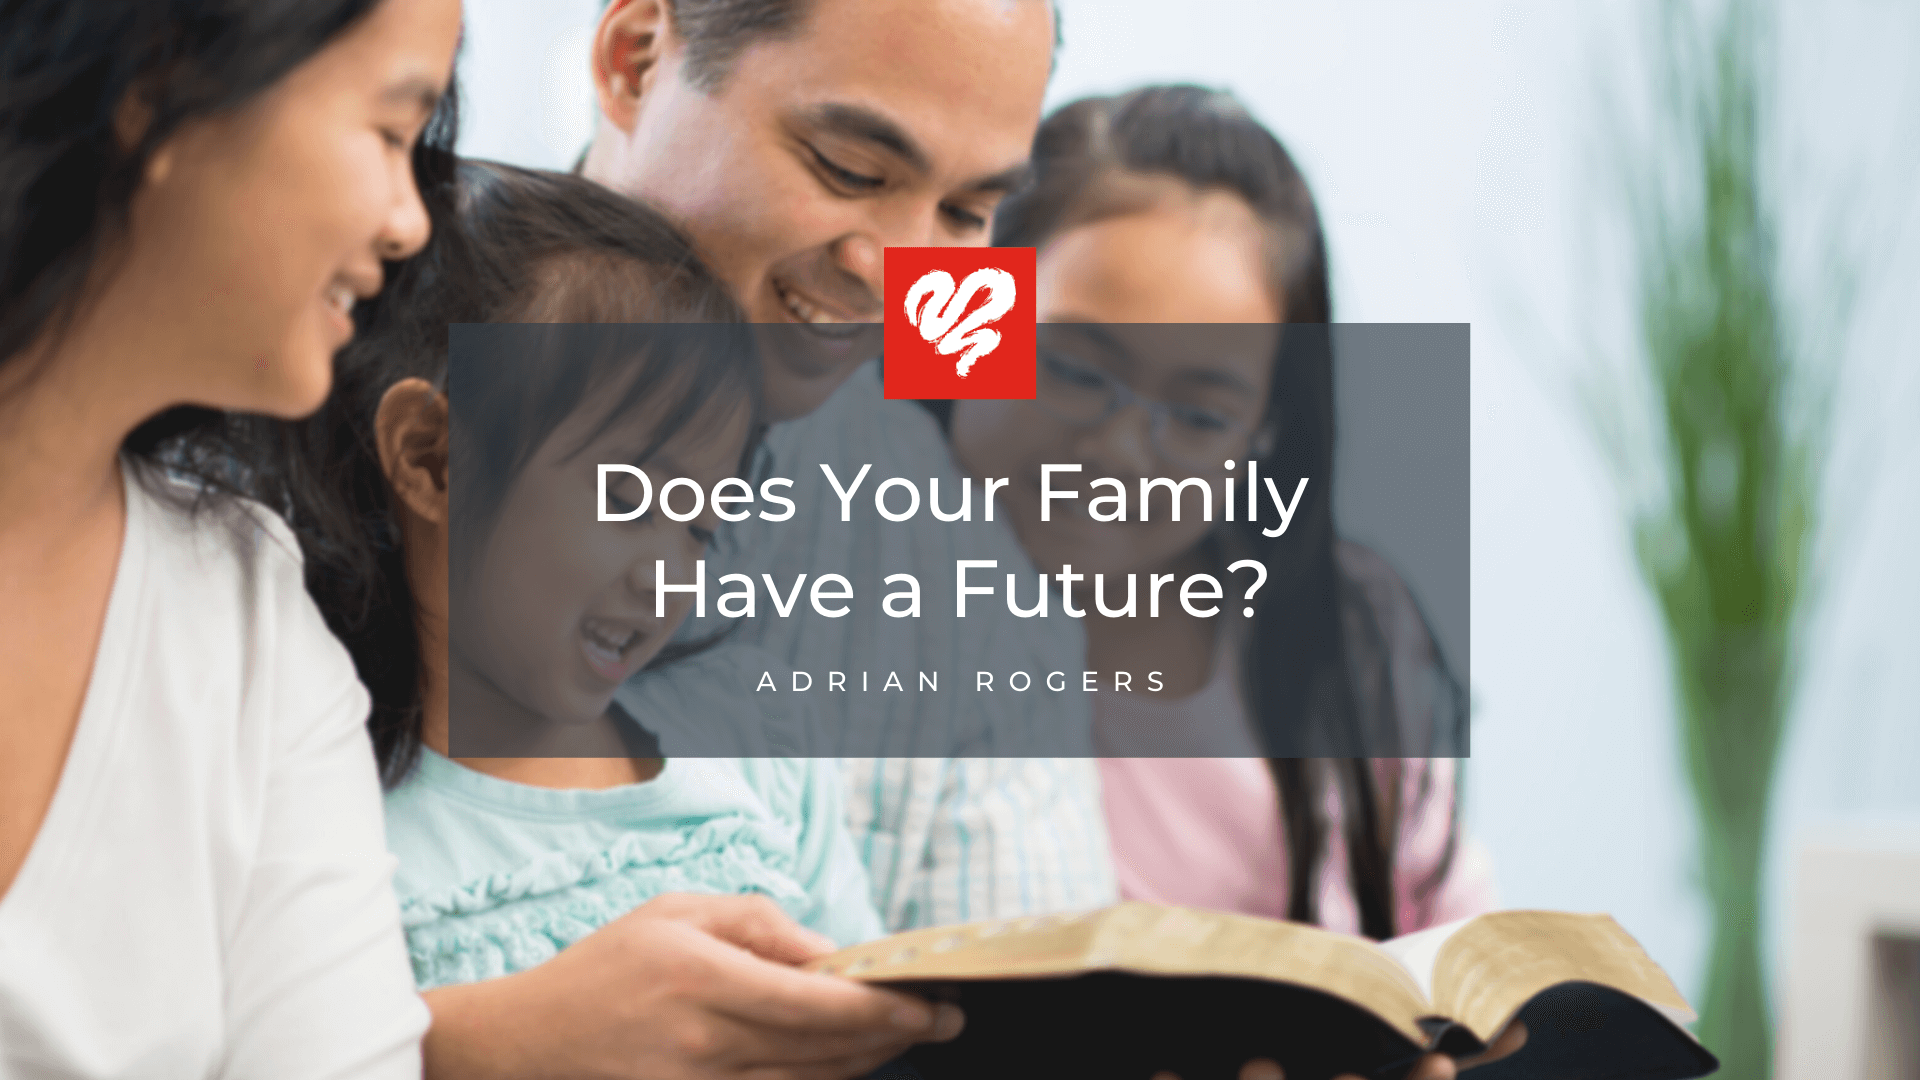 Does Your Family Have a Future Article 031421 1920x1080